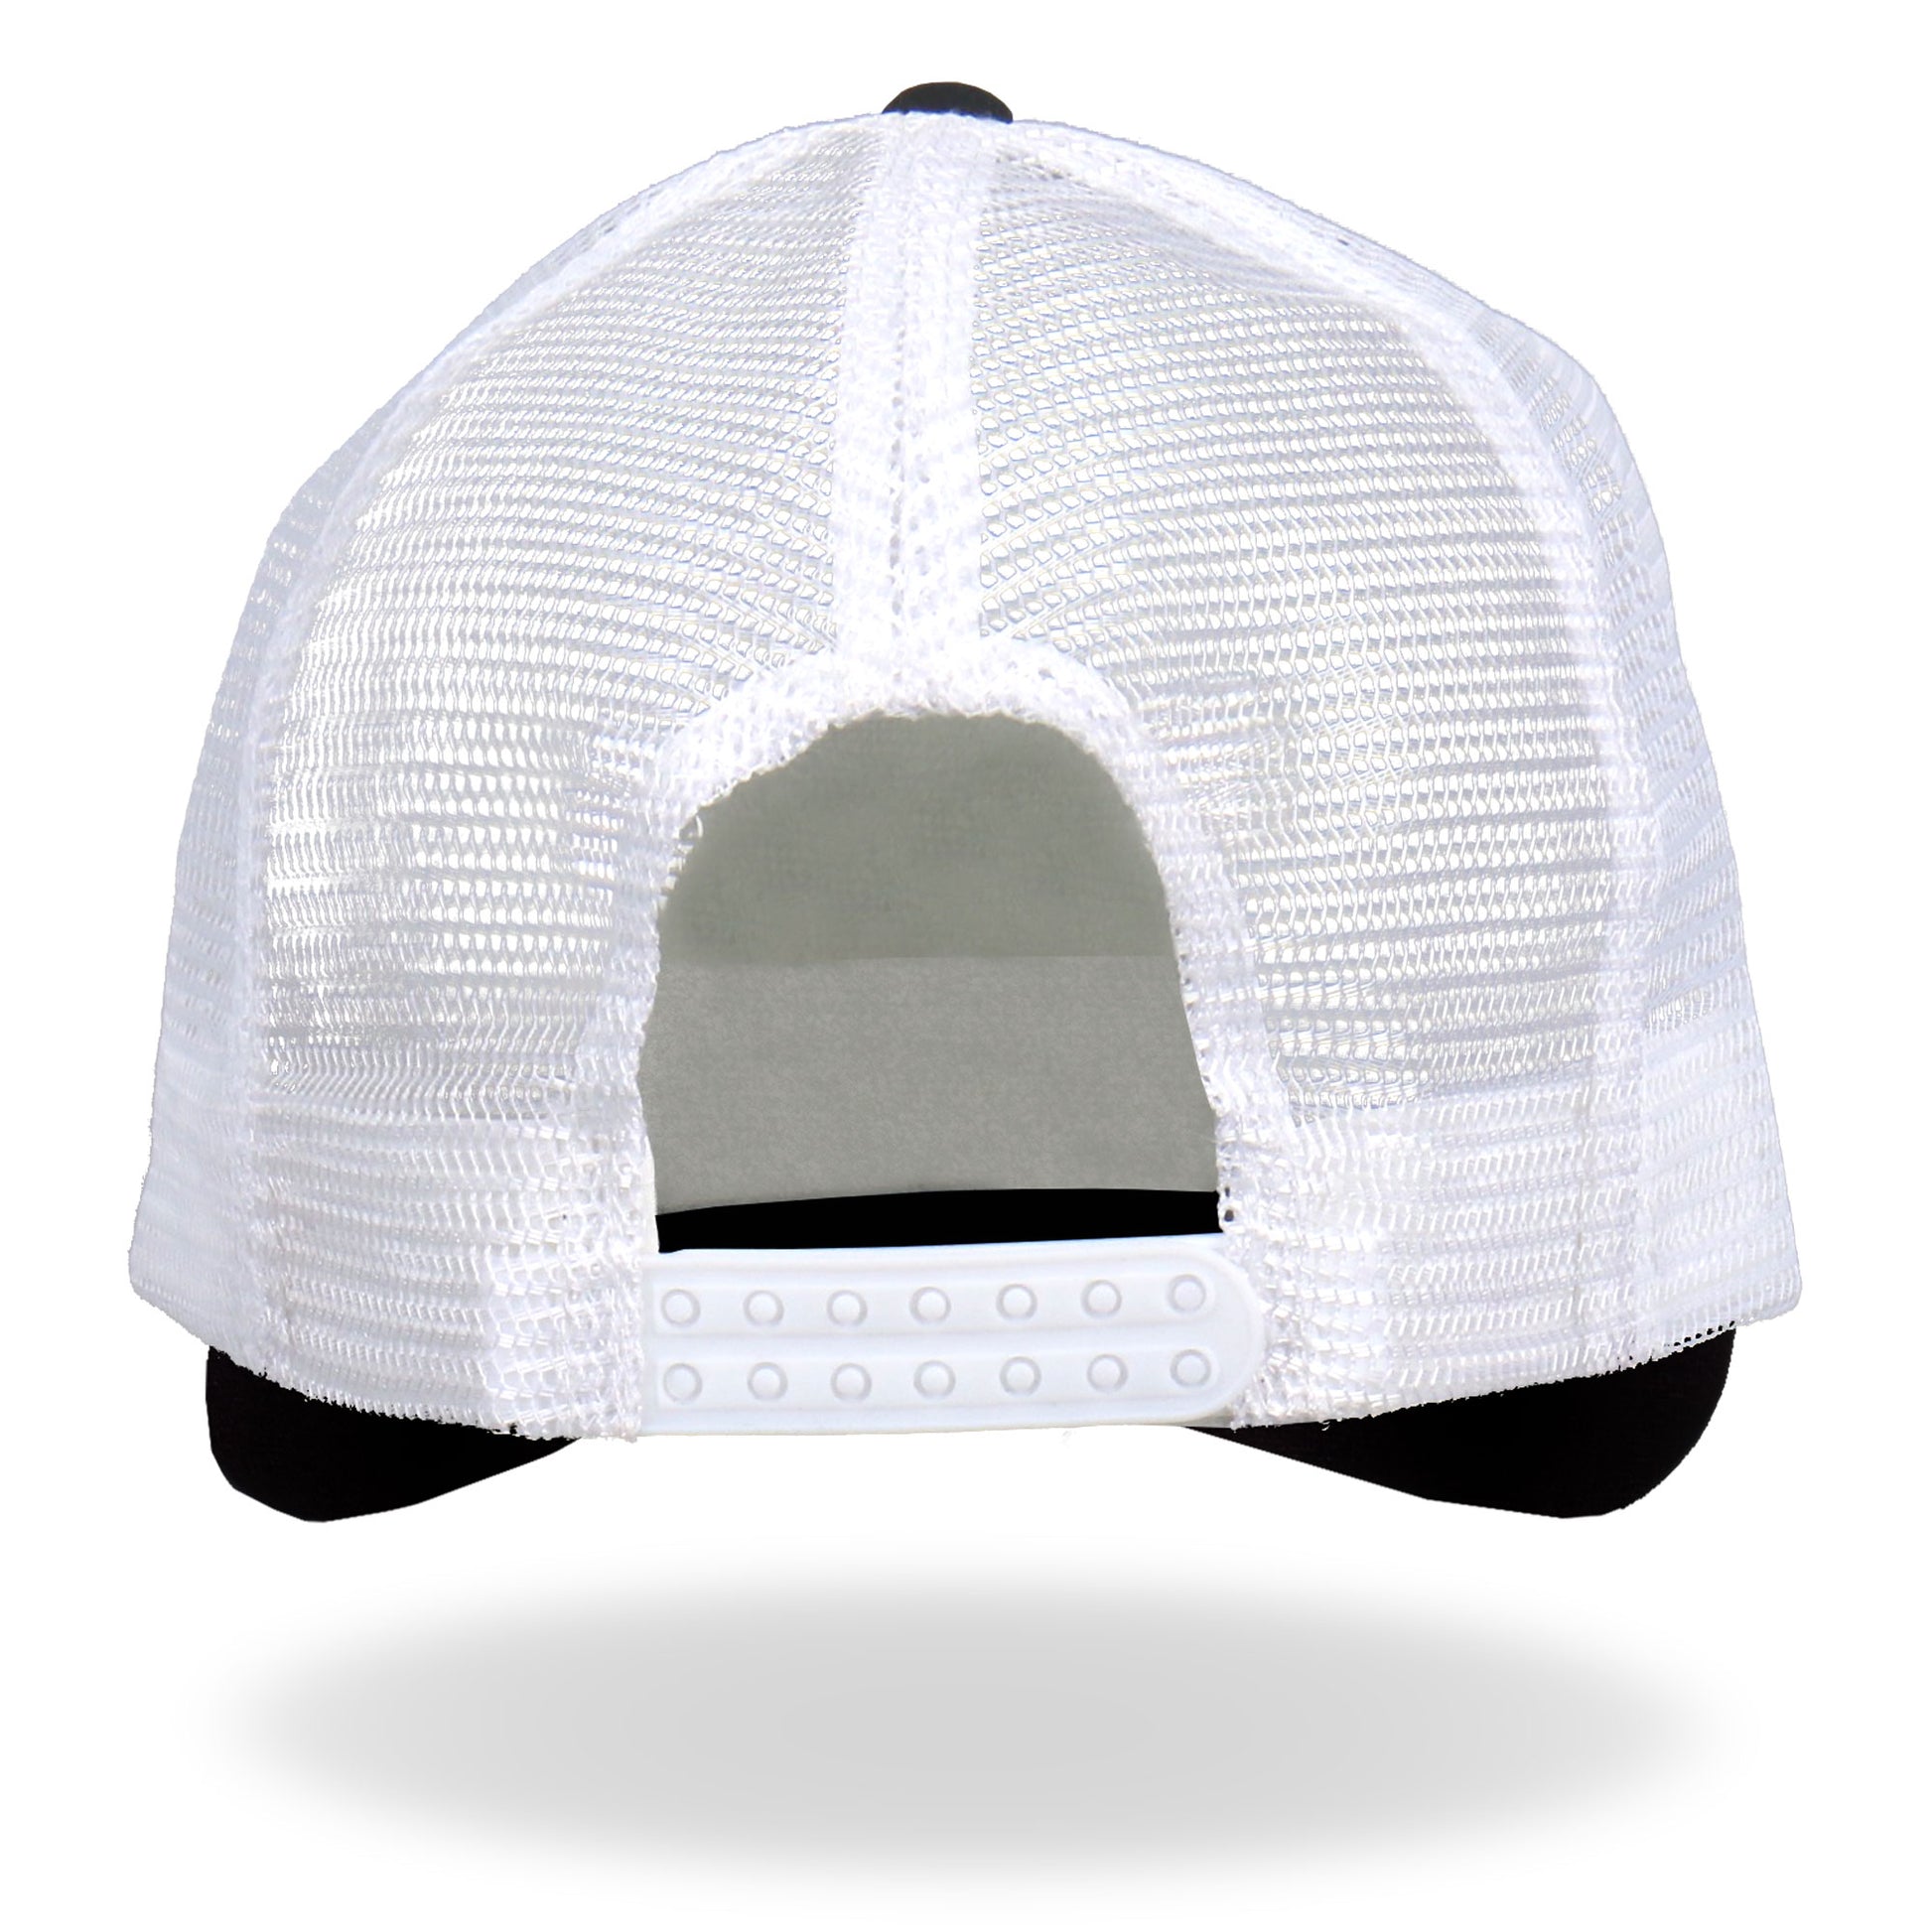 Hot Leathers GSH1012 Rooster Black and White Trucker Hat